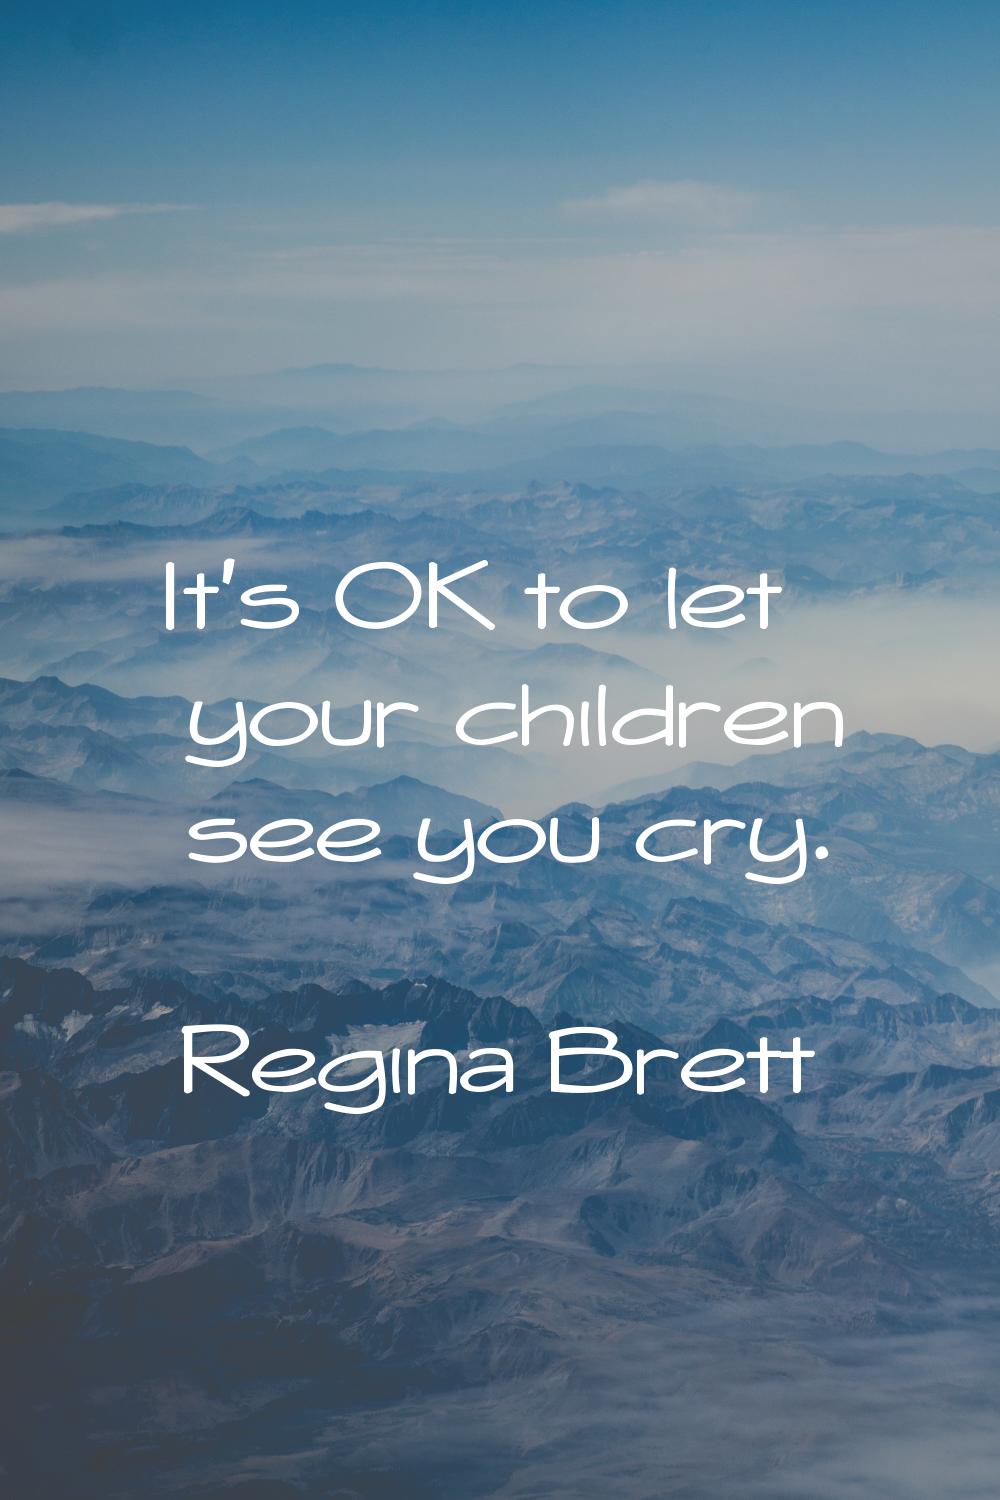 It's OK to let your children see you cry.